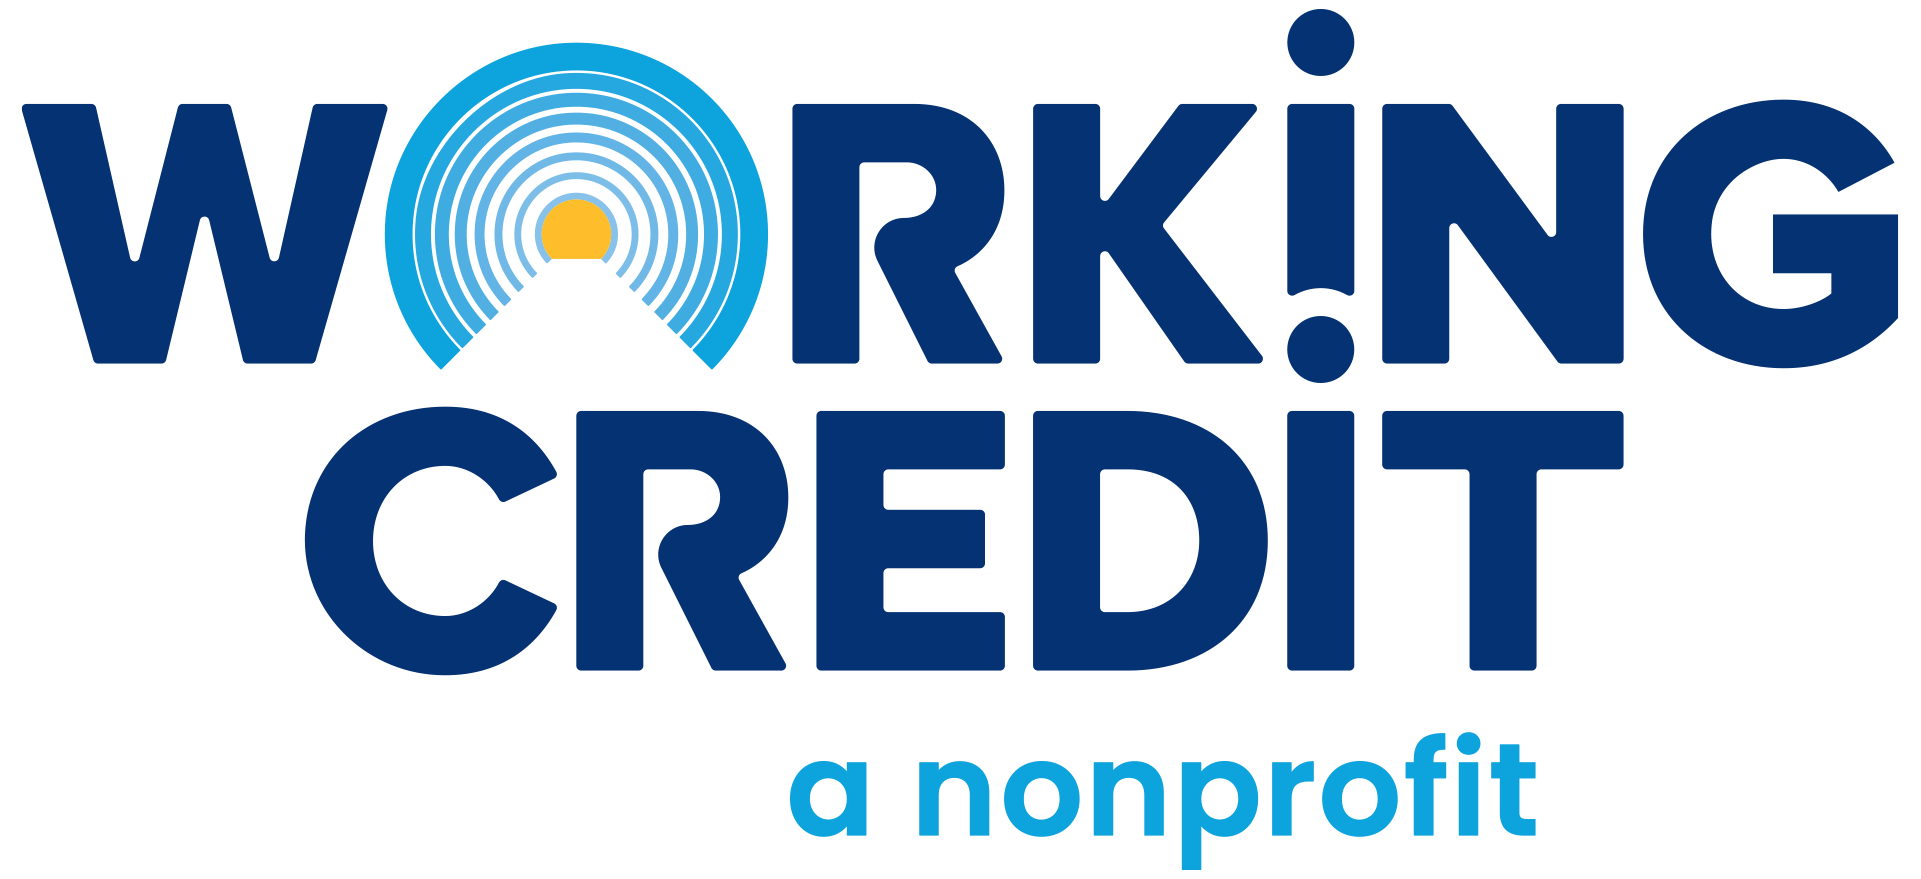 Working Credit